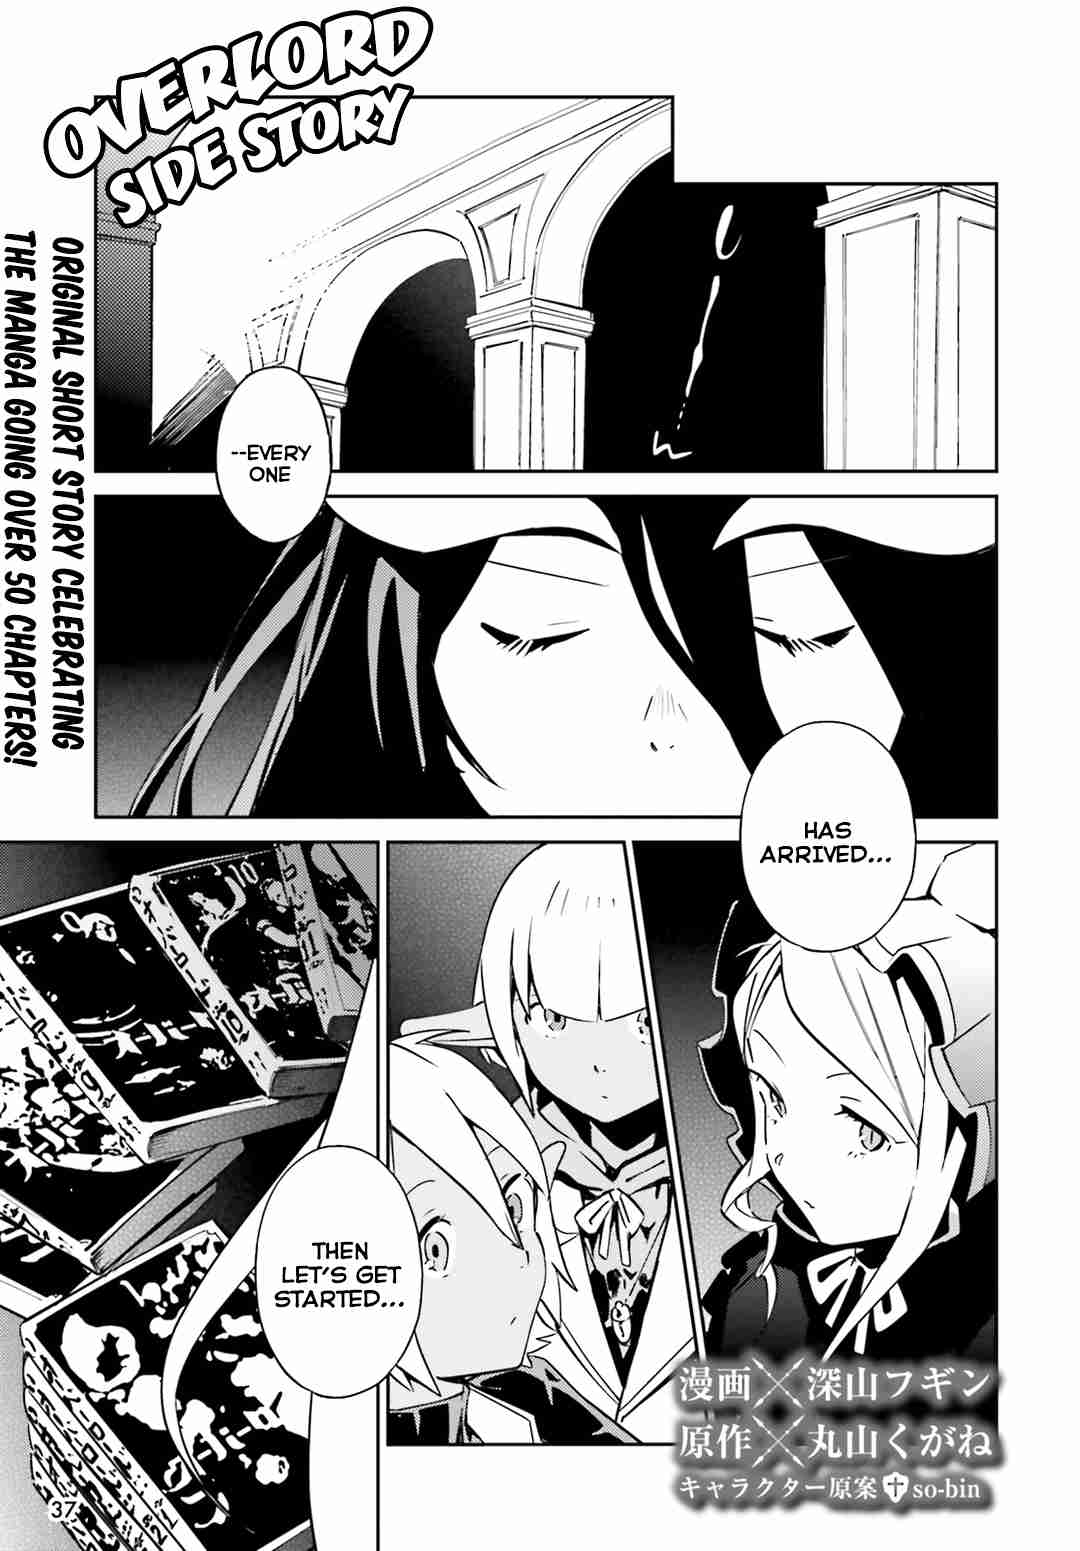 Overlord Vol. 13 Ch. 50.5